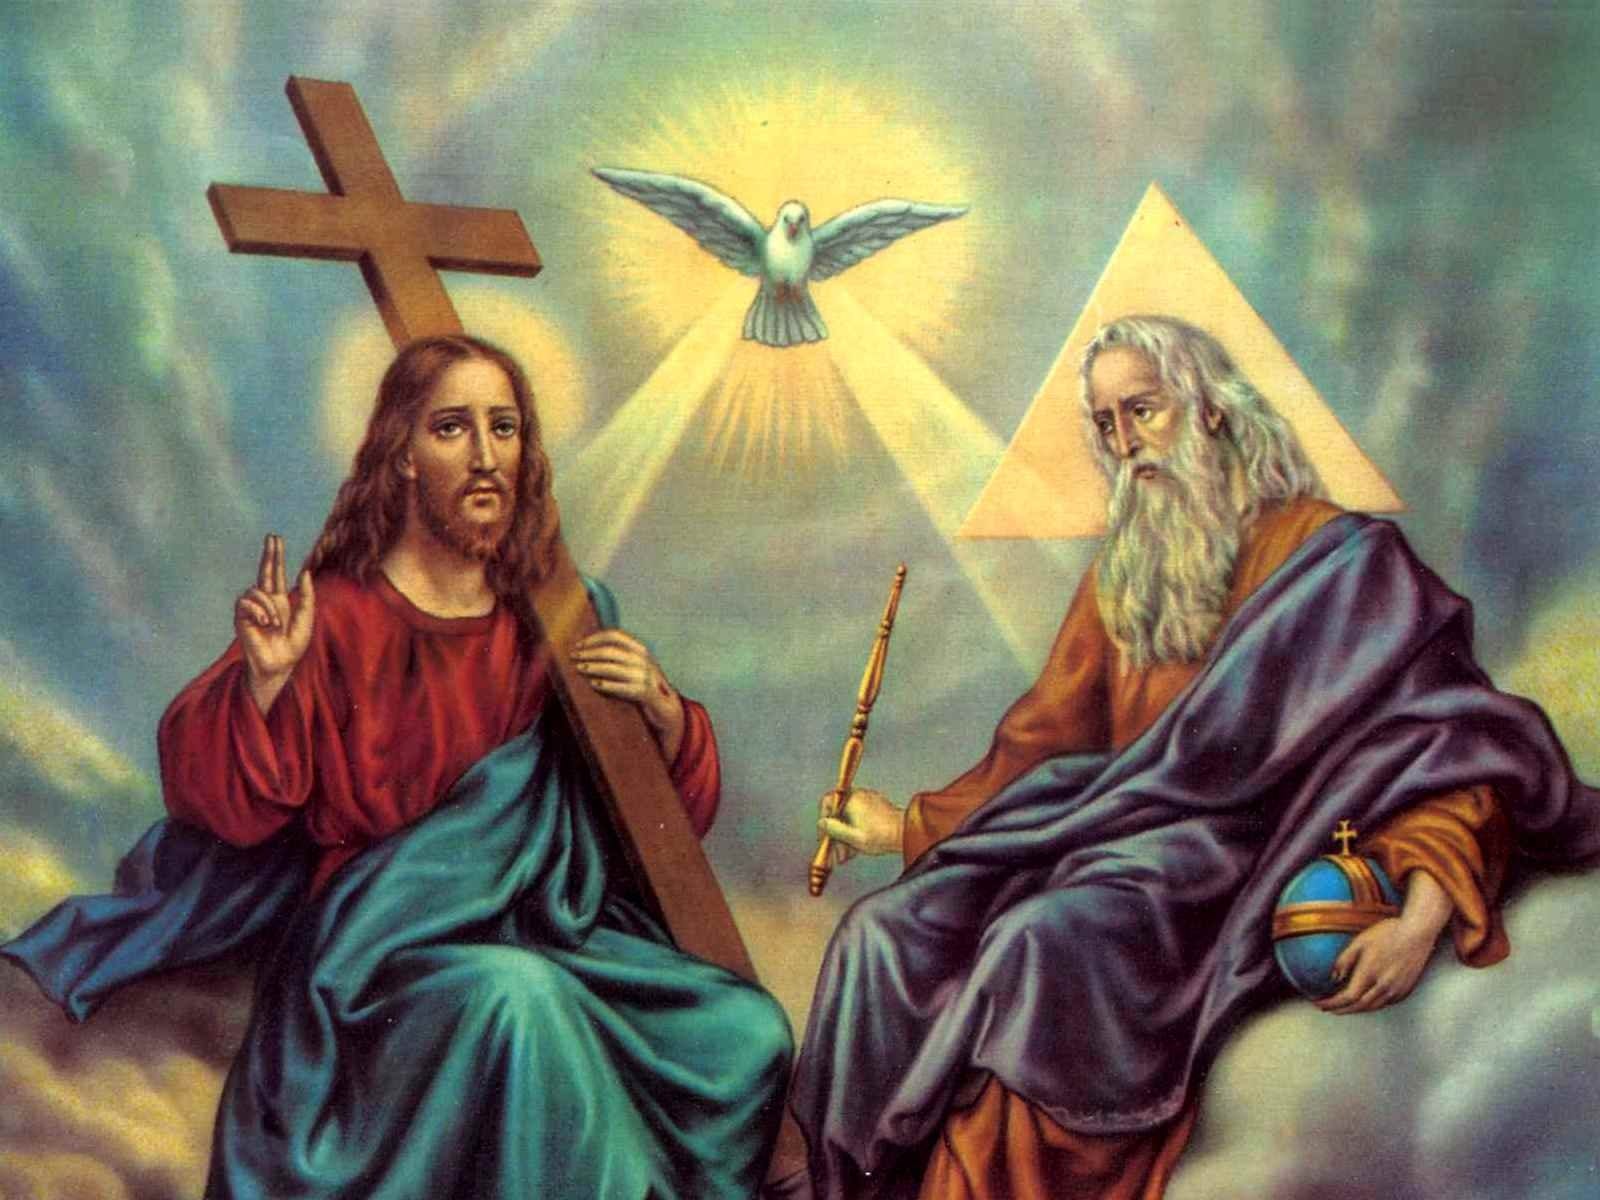 The Solemnity of the Holy Trinity that we are celebrating today is an invitation to contemplate on the mystery of our redemption. This mystery invites us to contemplate on the unity that exists with the Father, Son and Holy Spirit